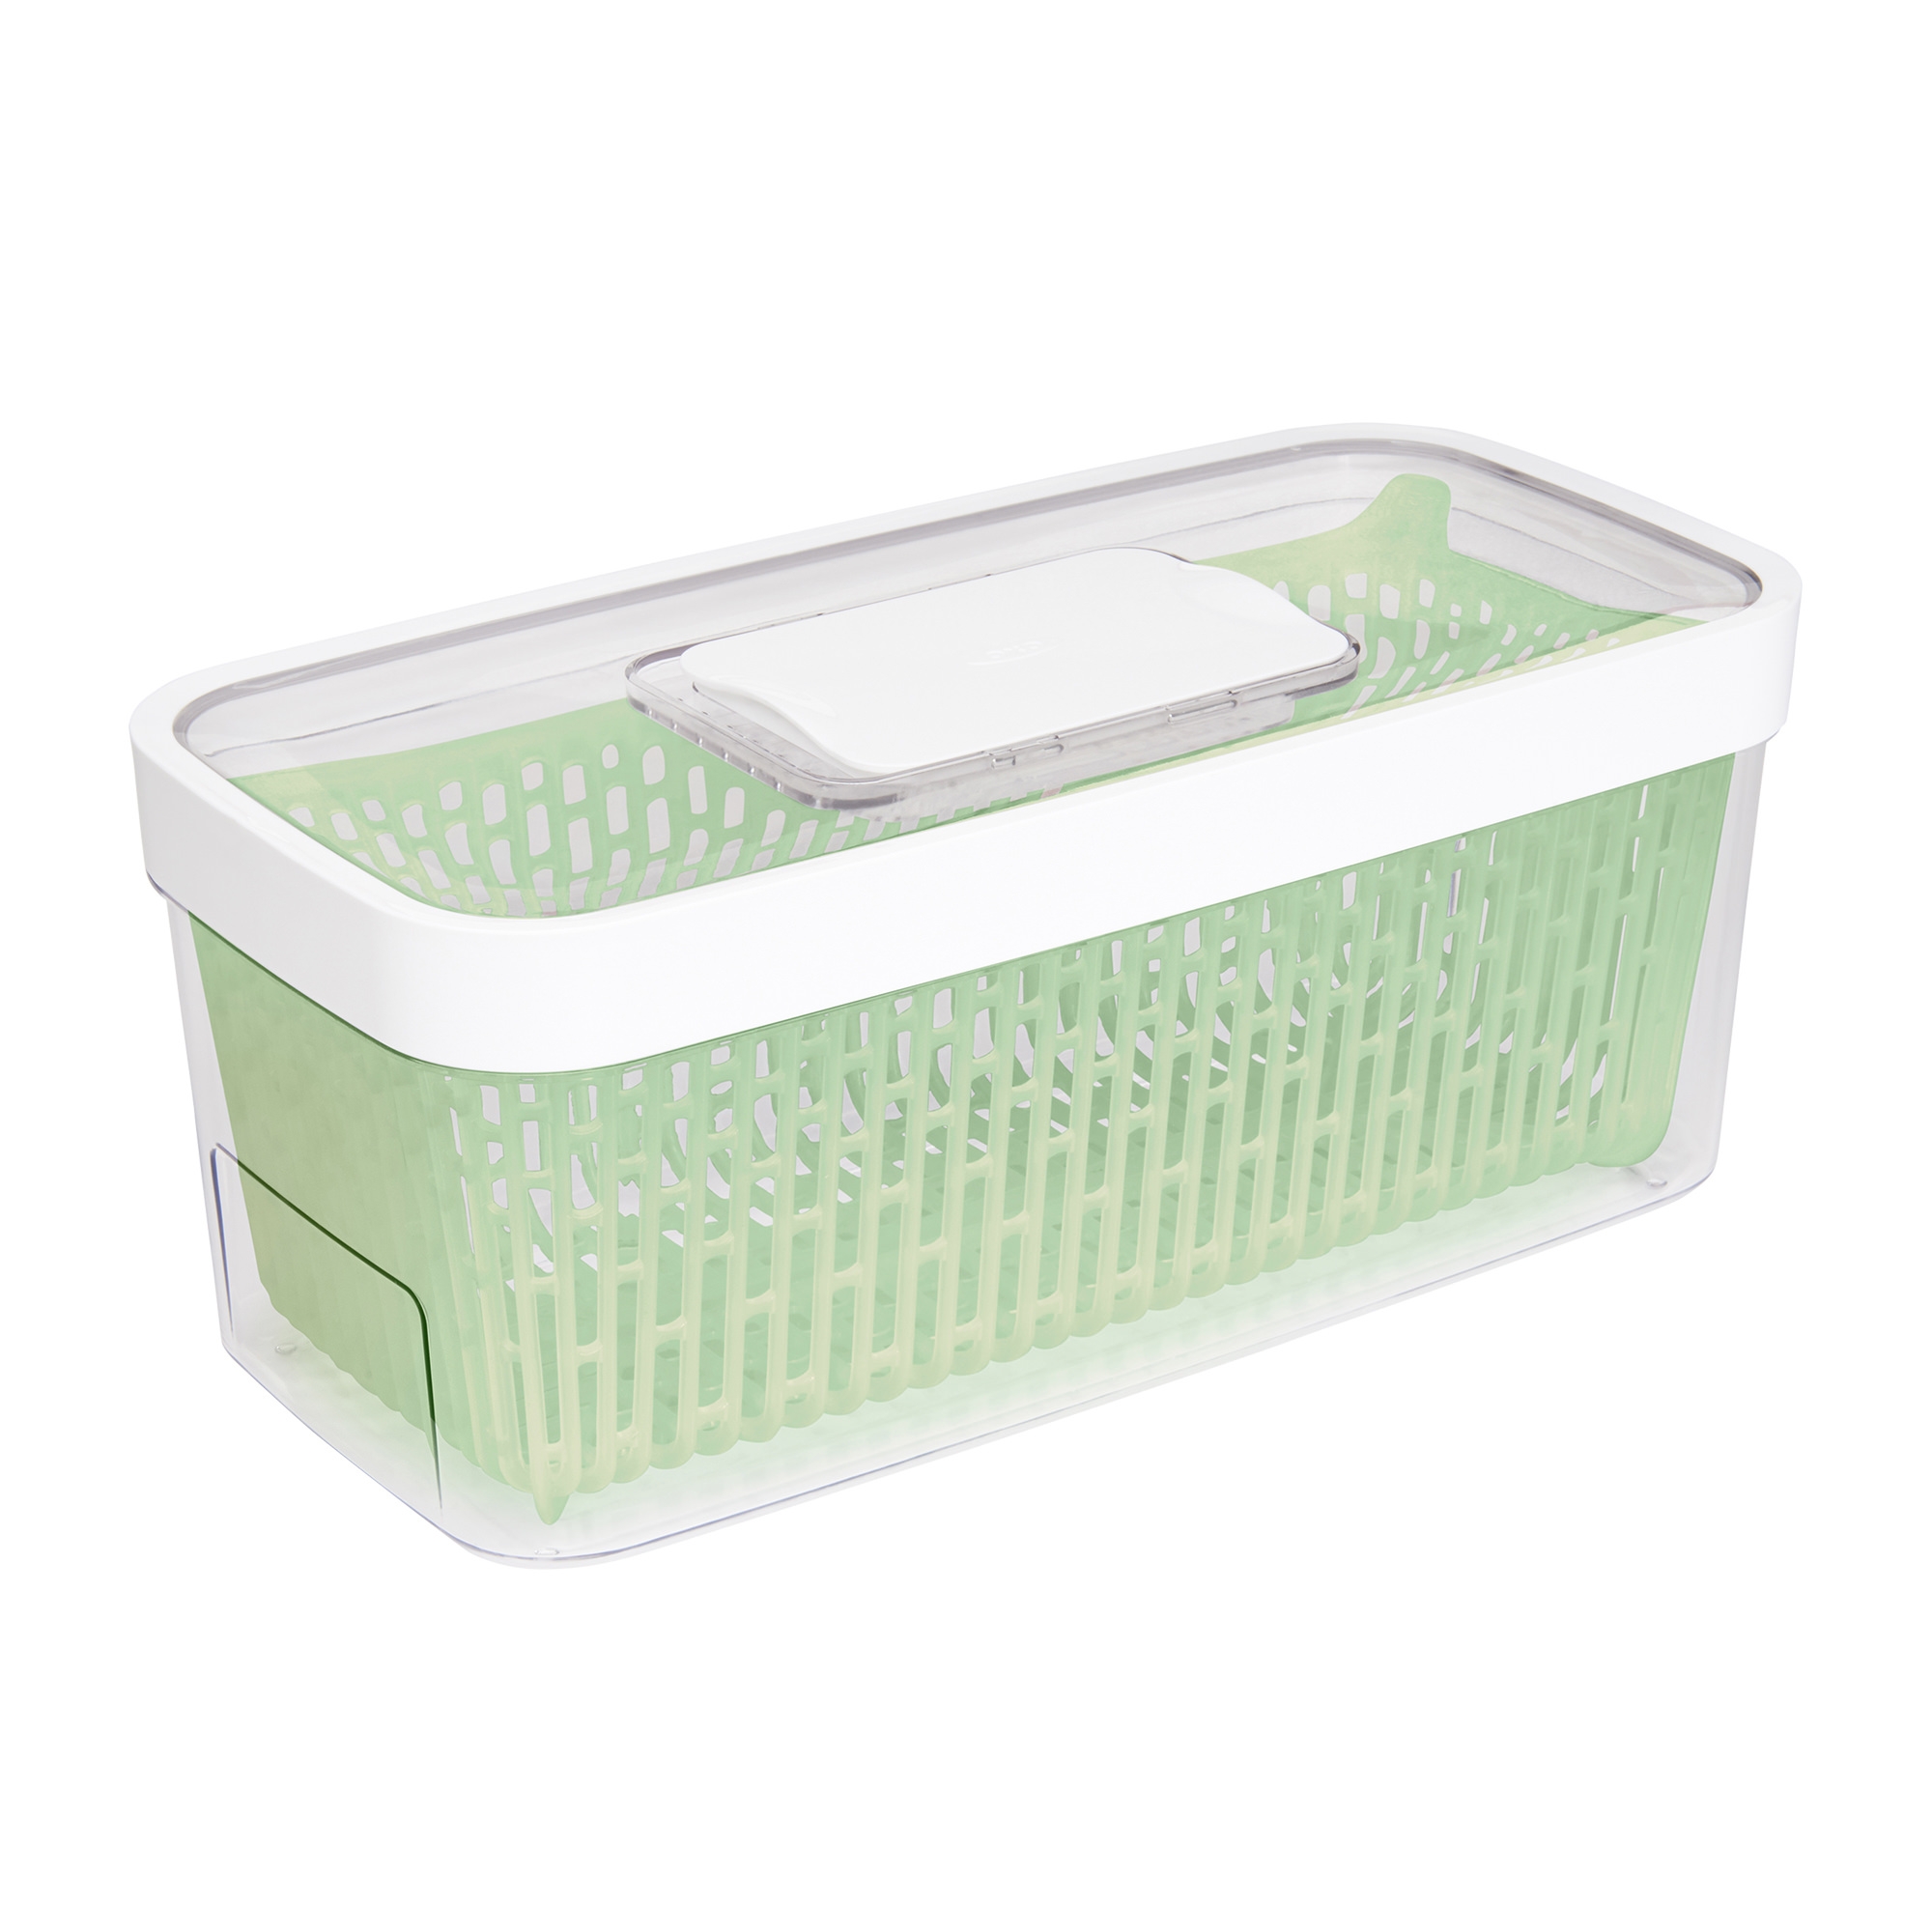 OXO Good Grips GreenSaver Produce Keeper 4.7L Image 1